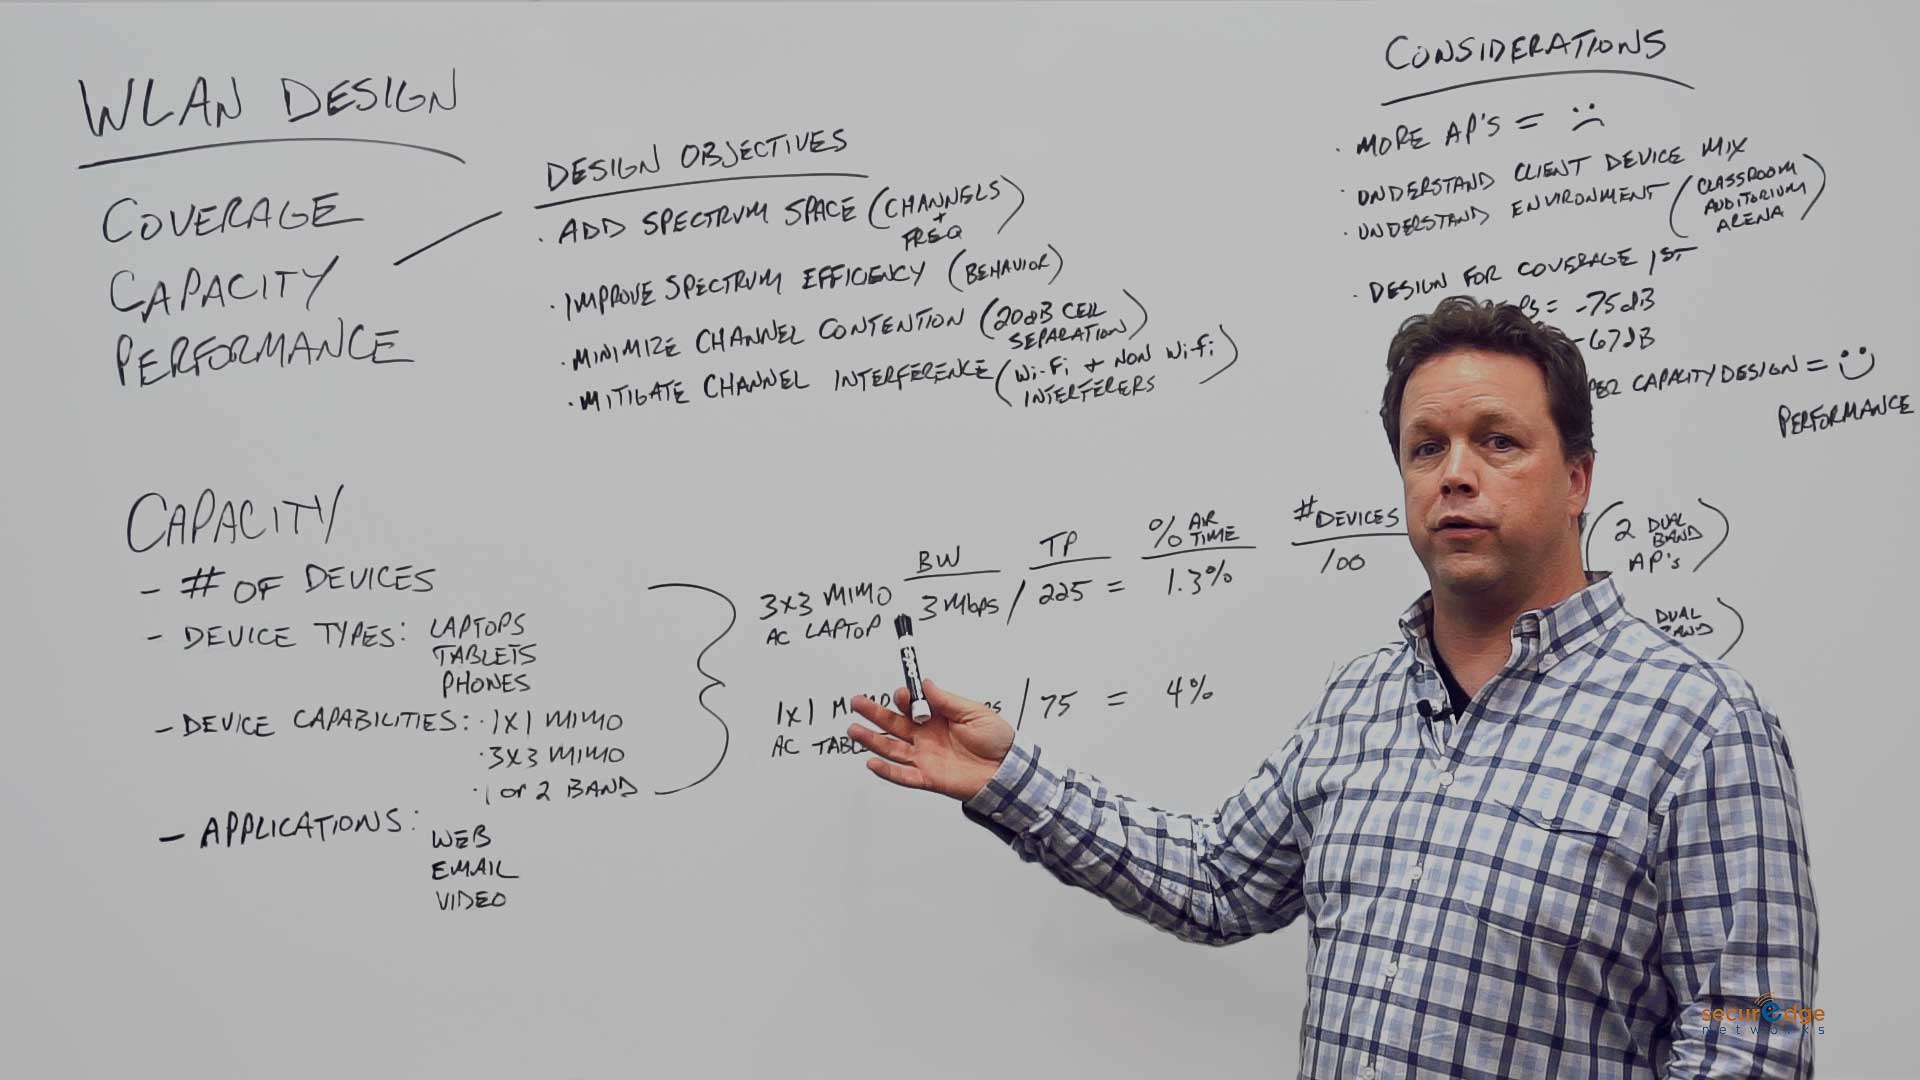 How to Design Wireless Networks for Capacity [Whiteboard Video]